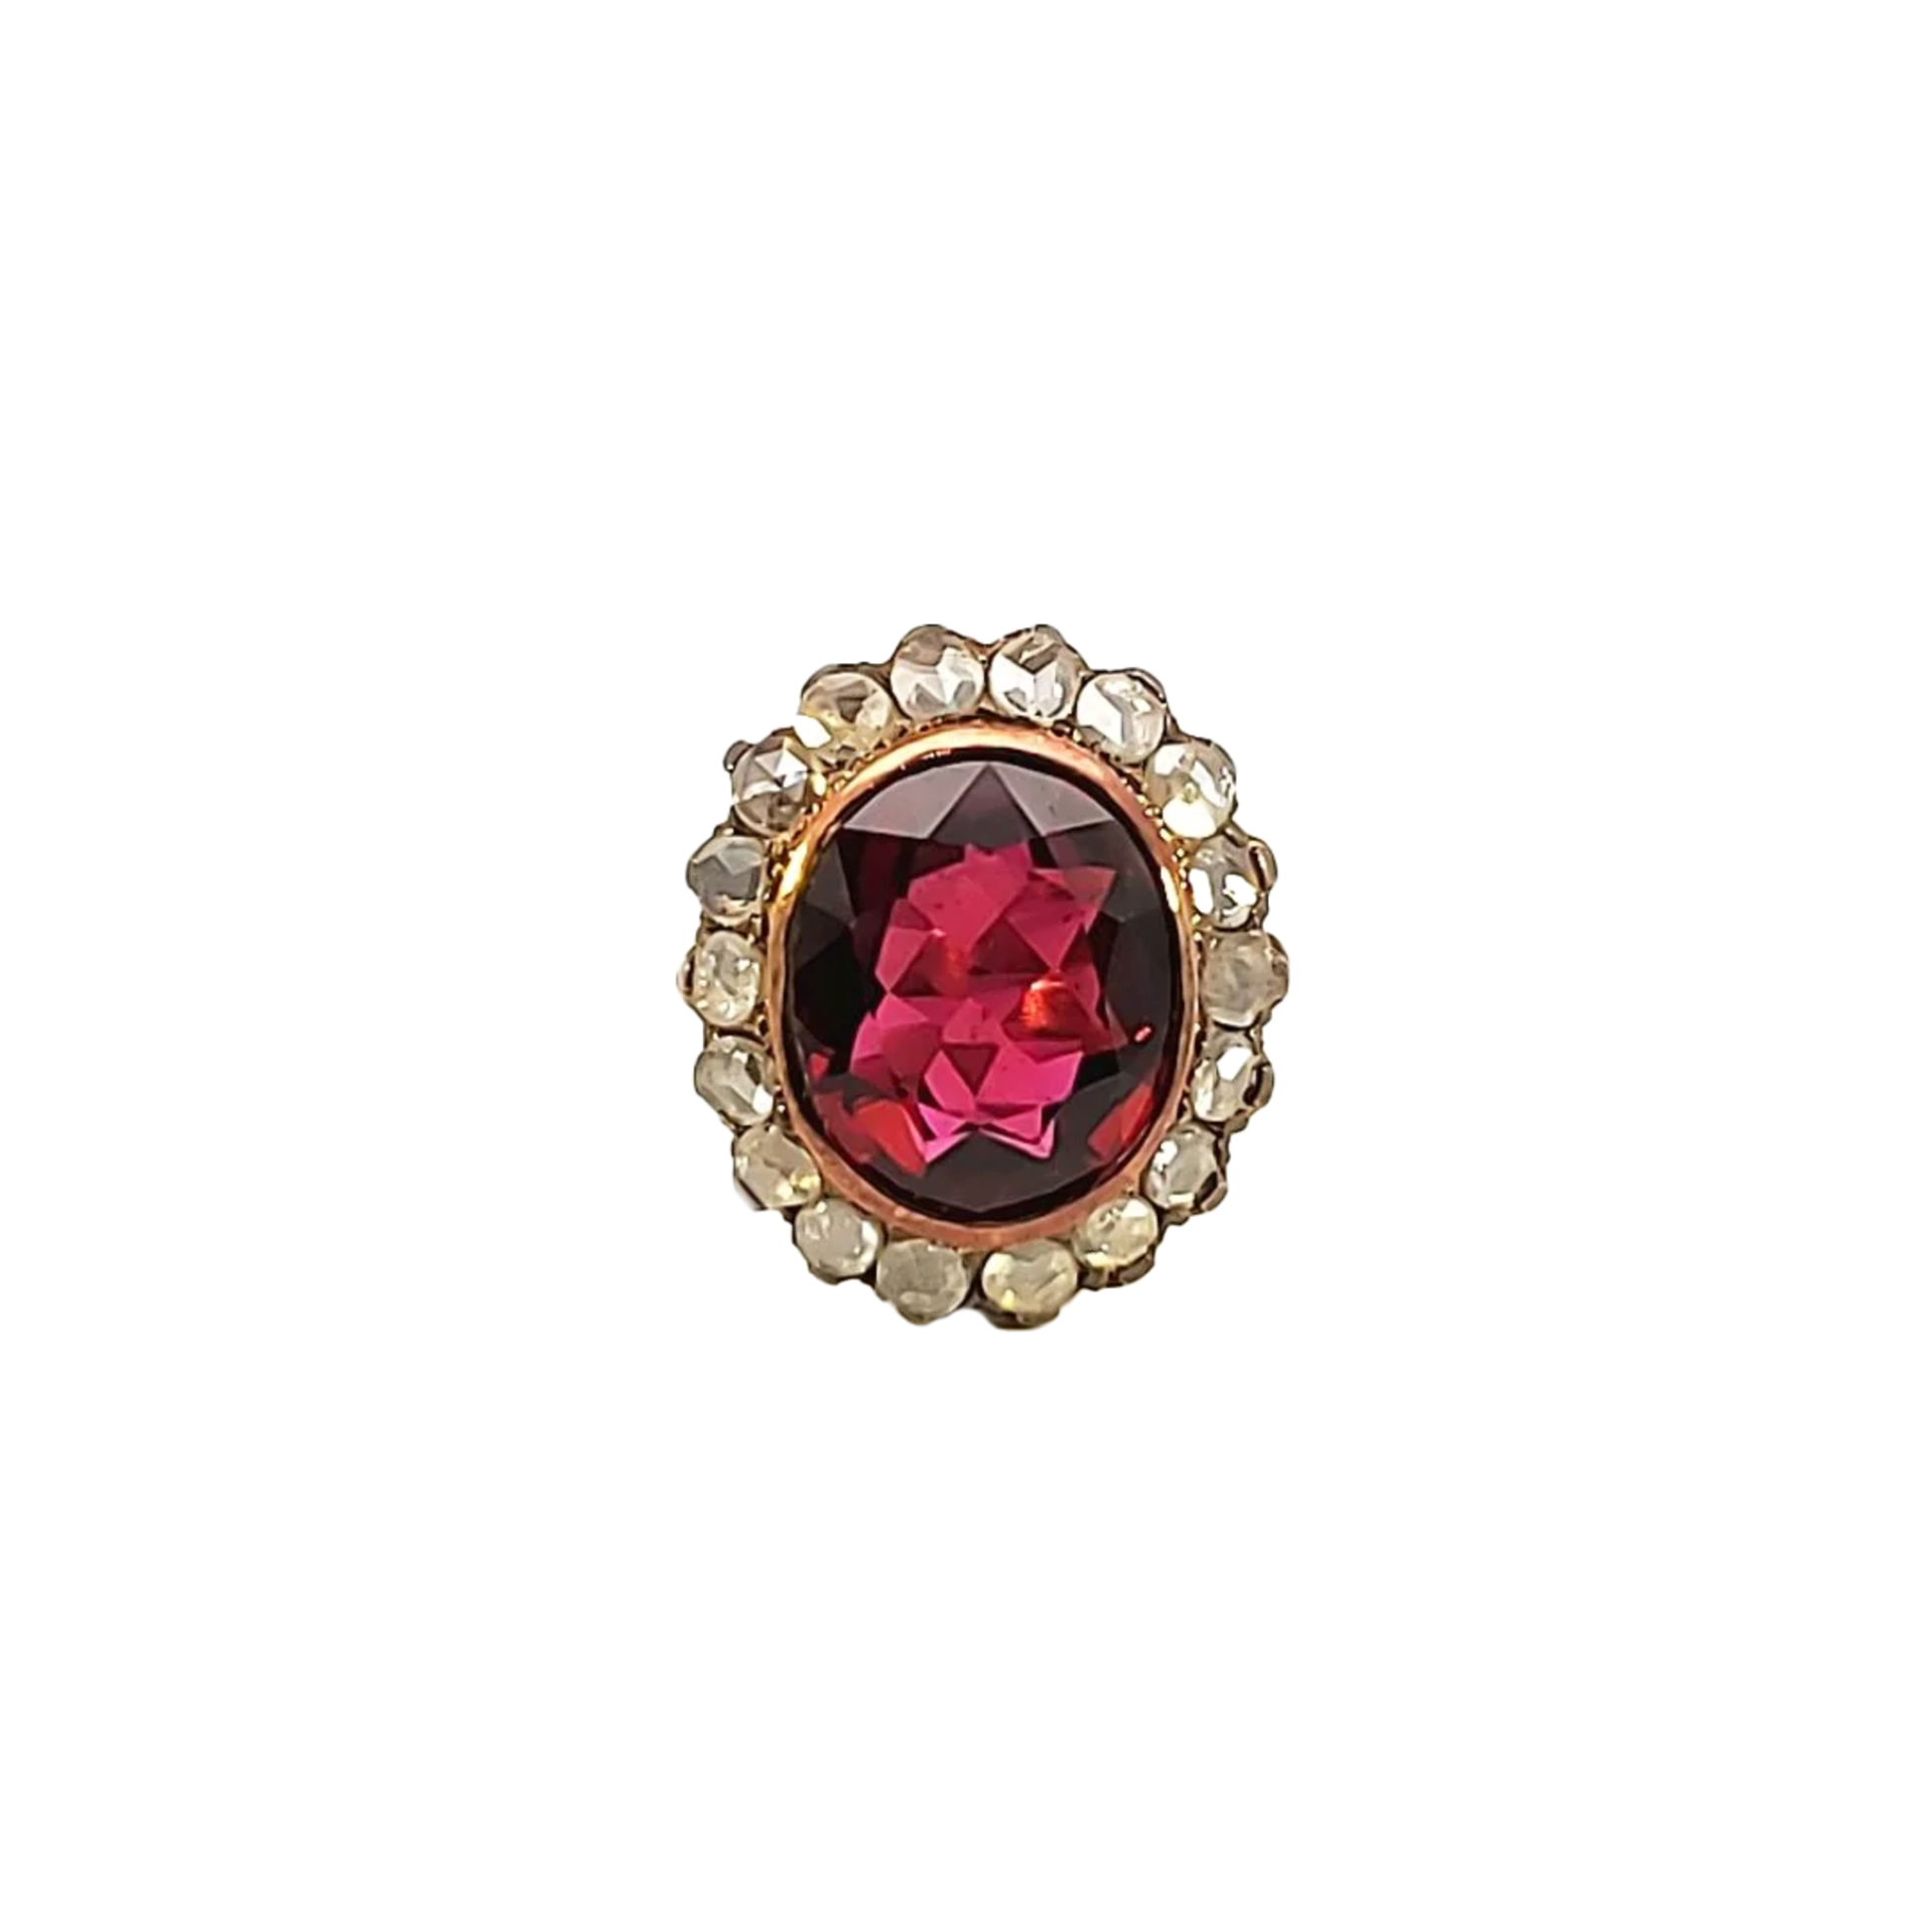 1970s 18KT Yellow Gold Rubellite & Diamond Ring front